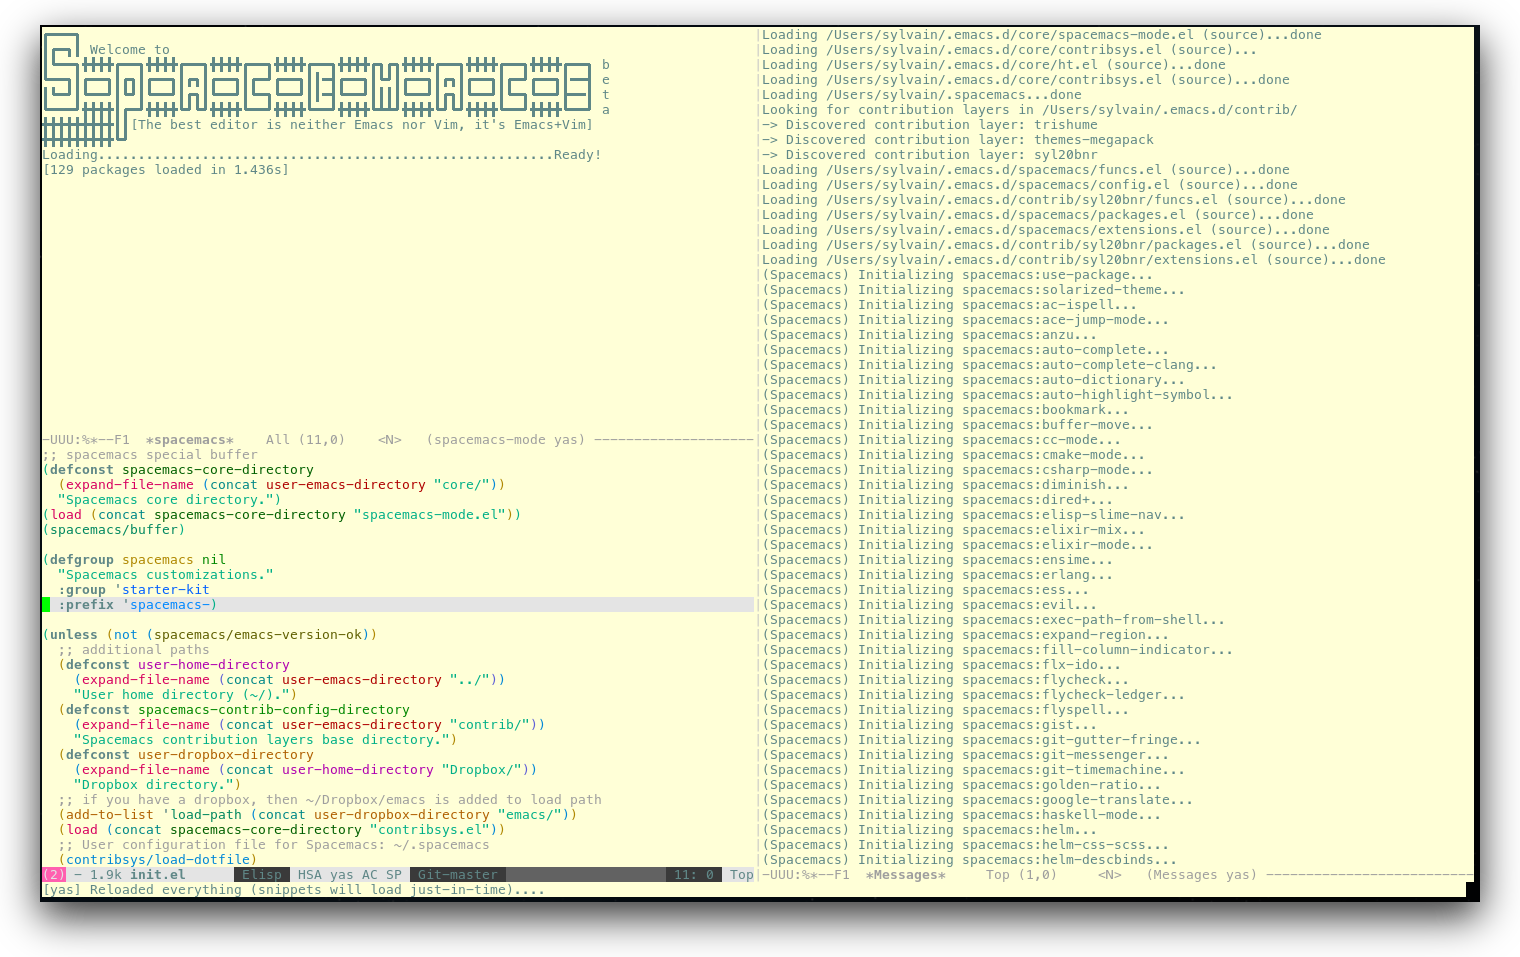 /TakeV/spacemacs/media/commit/34ce7a0c234d49d8abe9b0b75351155f6bc808b5/doc/img/spacemacs-urxvt.png